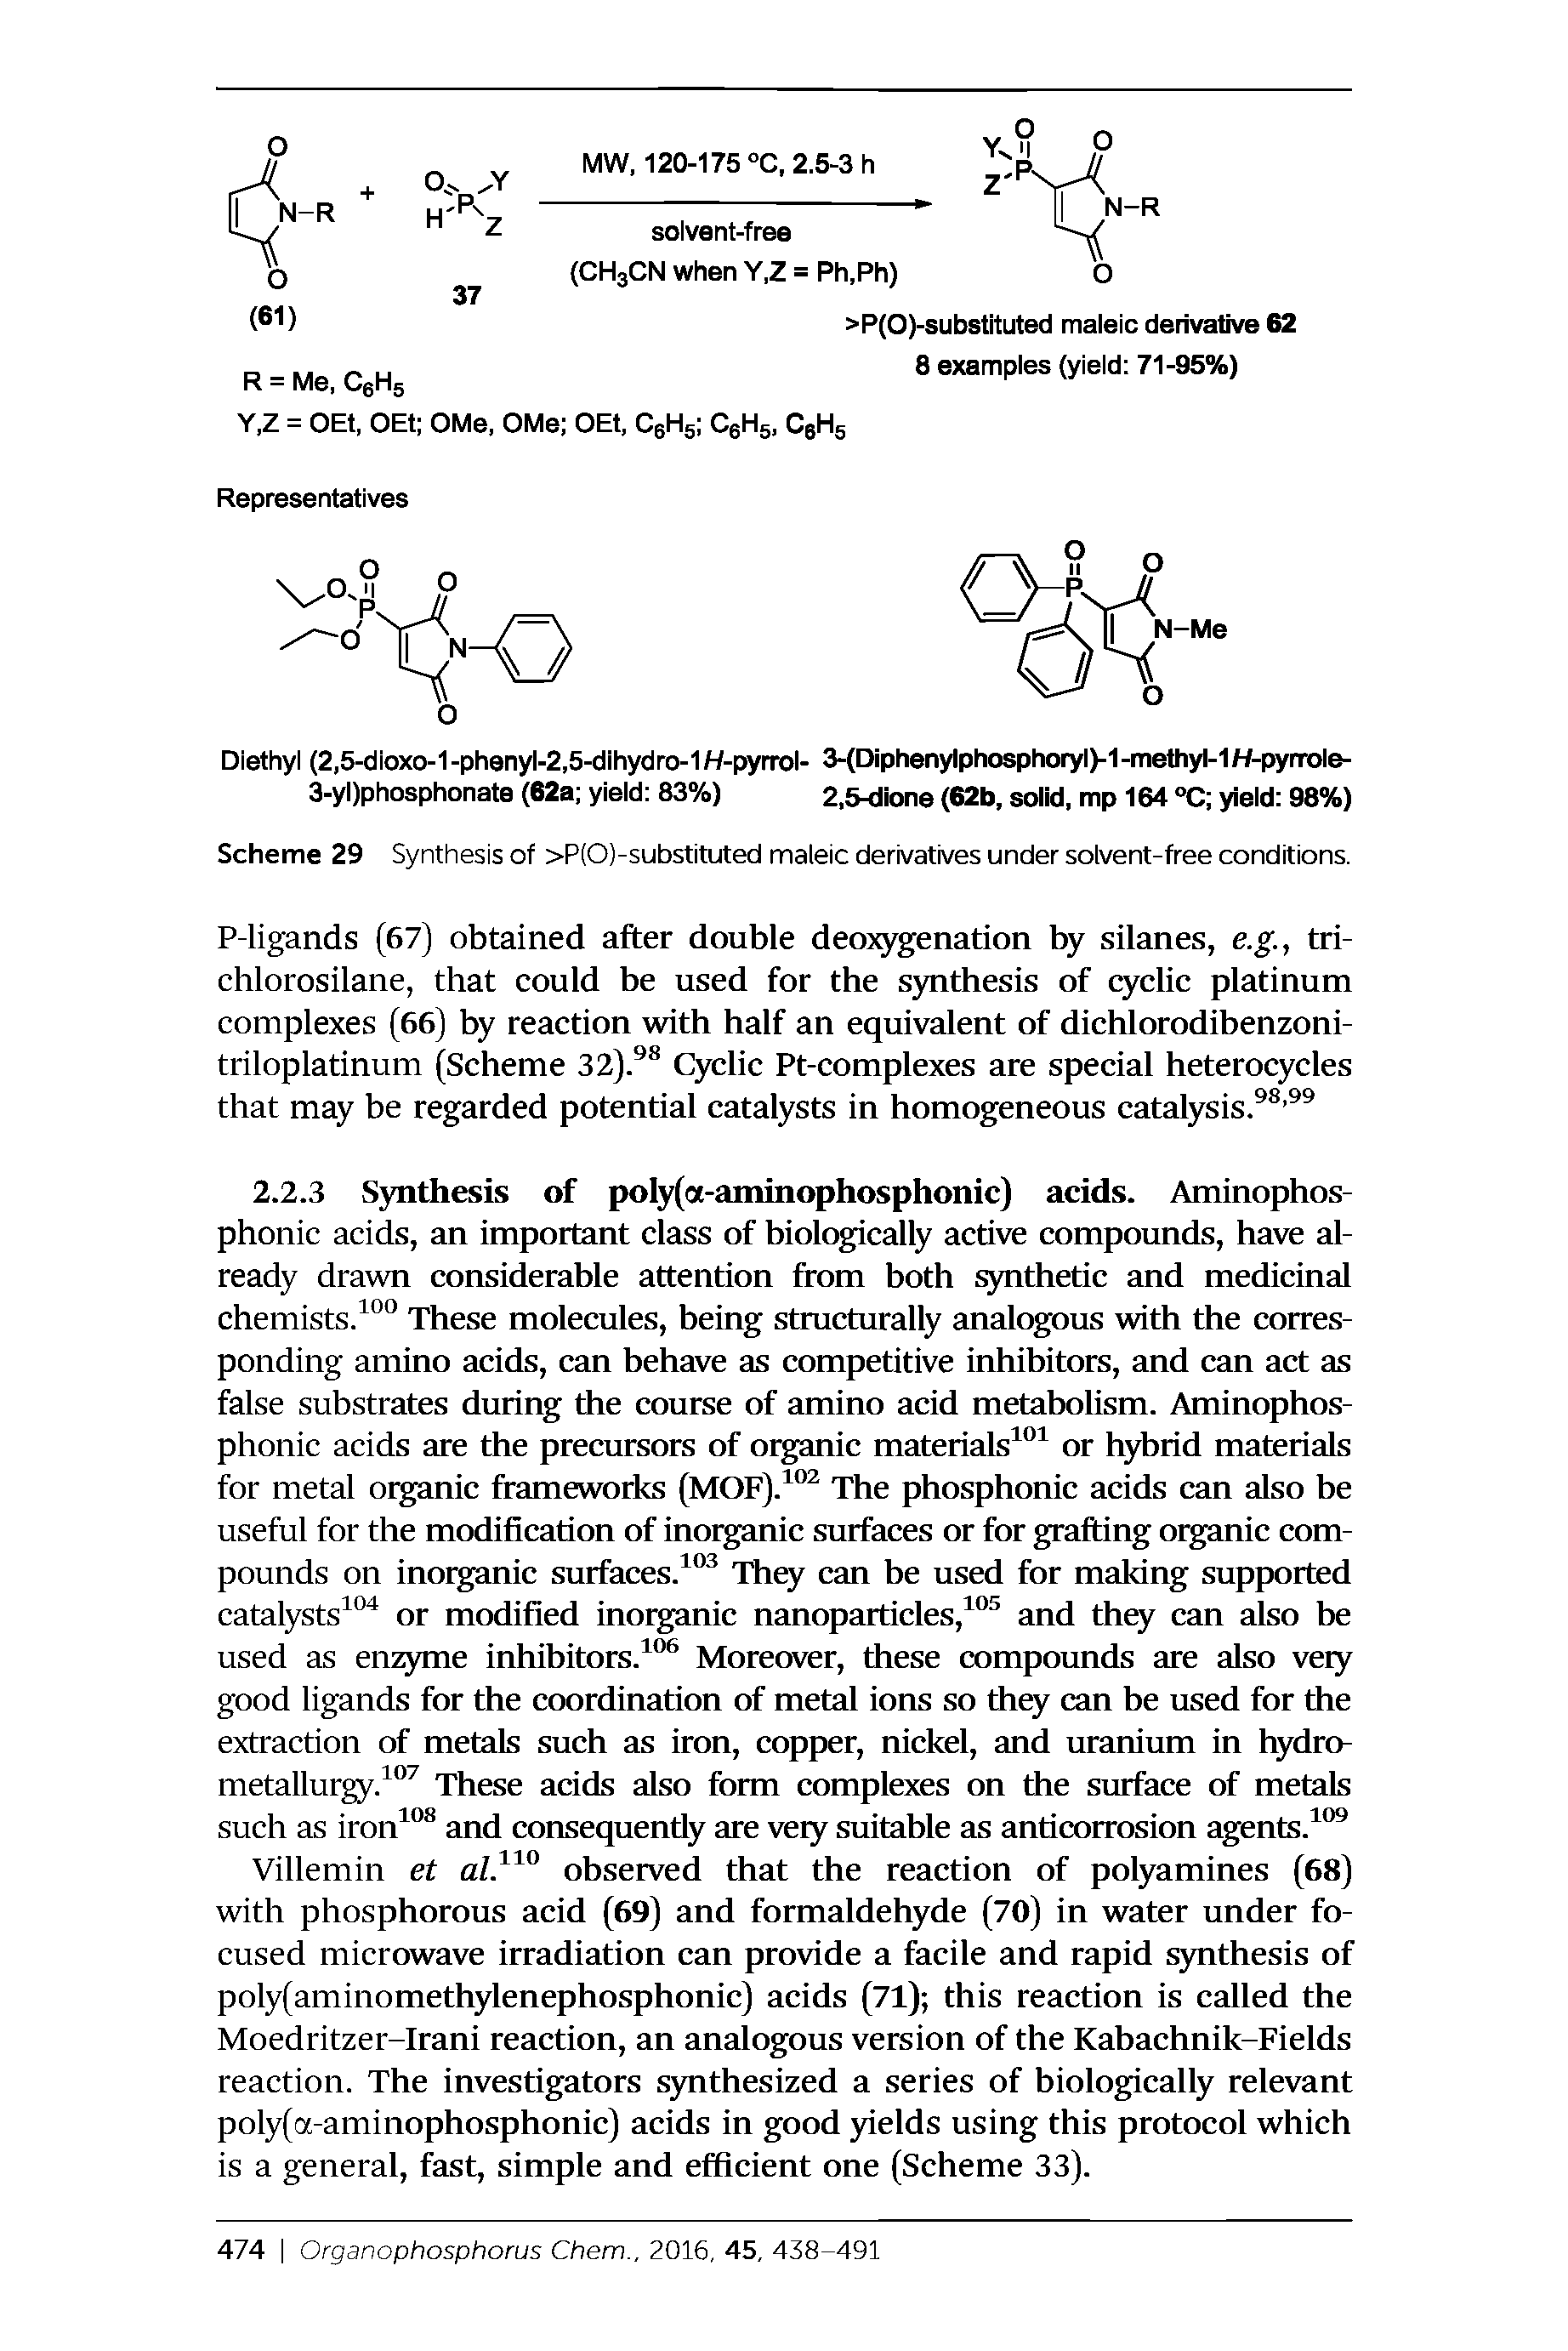 Scheme 29 Synthesis of >P(0)-substituted maleic derivatives under solvent-free conditions.